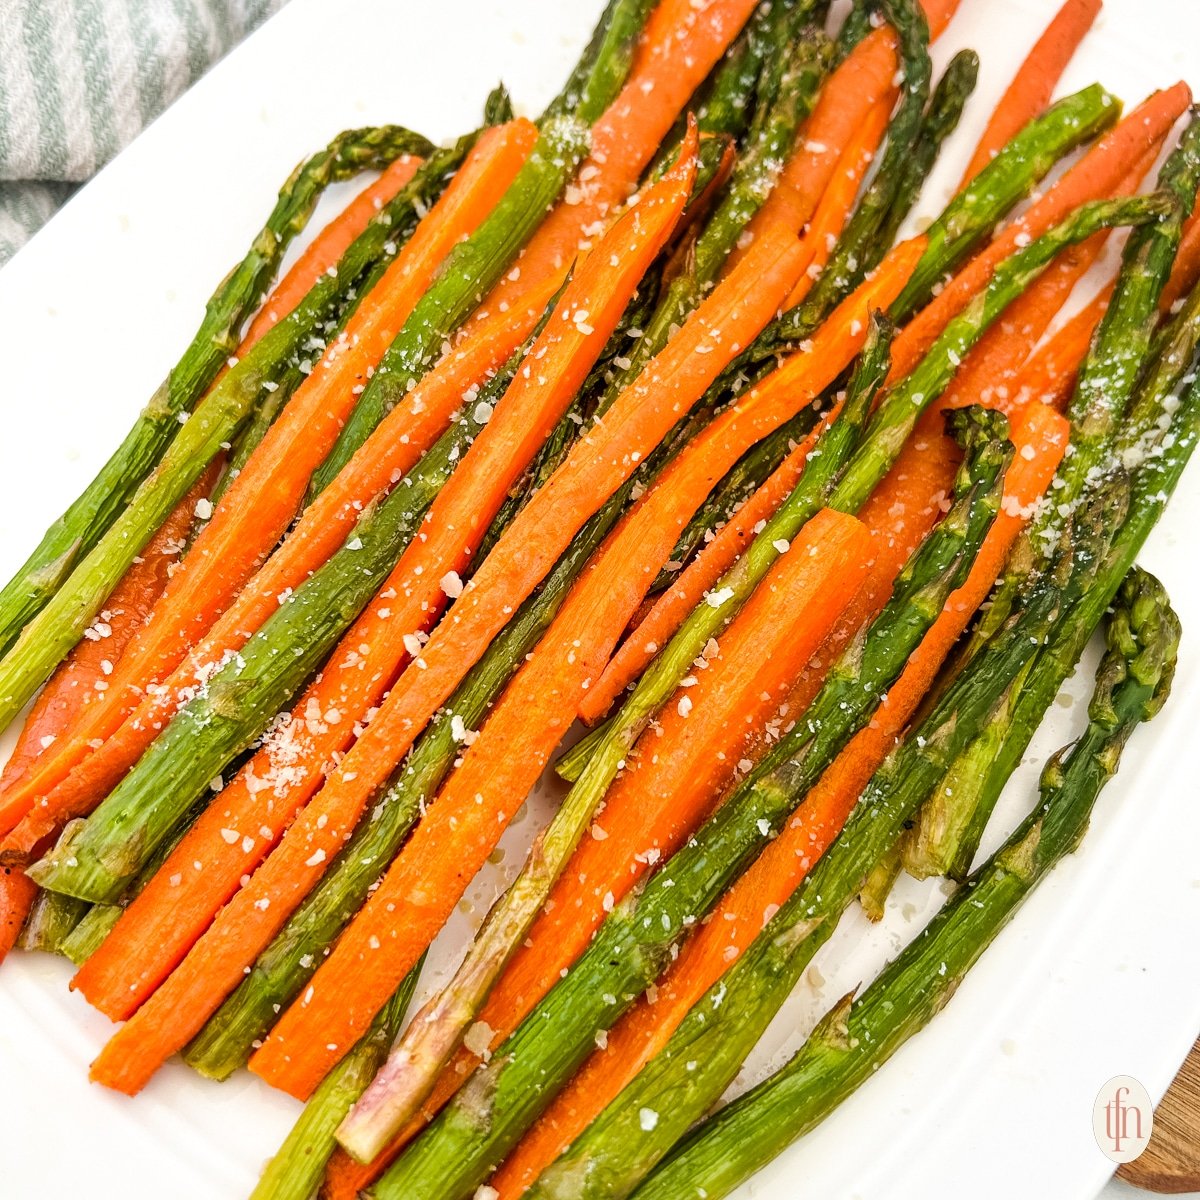 A plate of roasted carrots and asparagus.